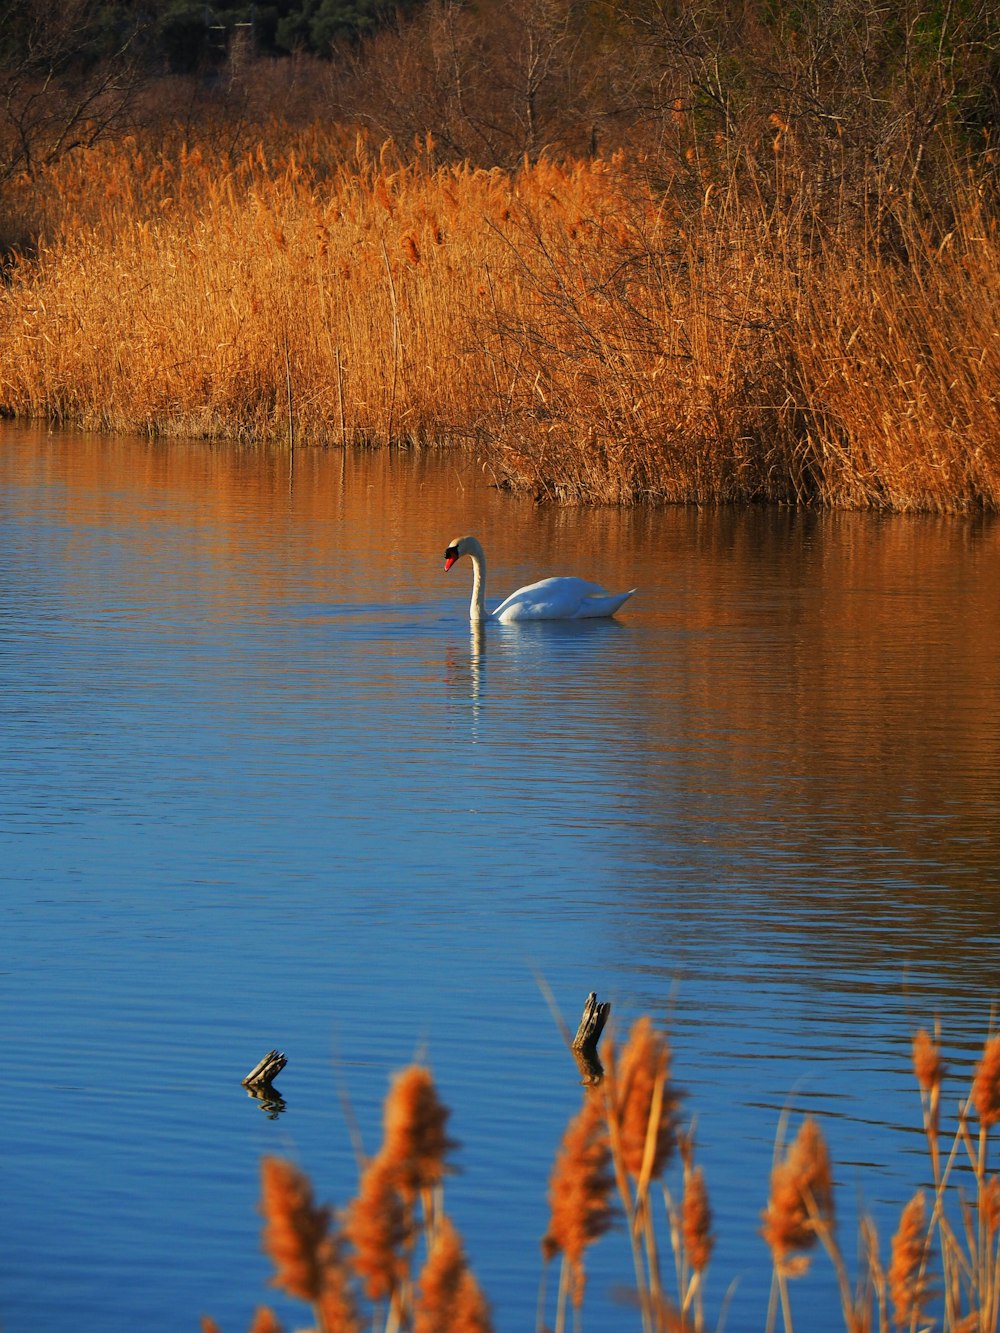 a swan is swimming in a lake surrounded by tall grass